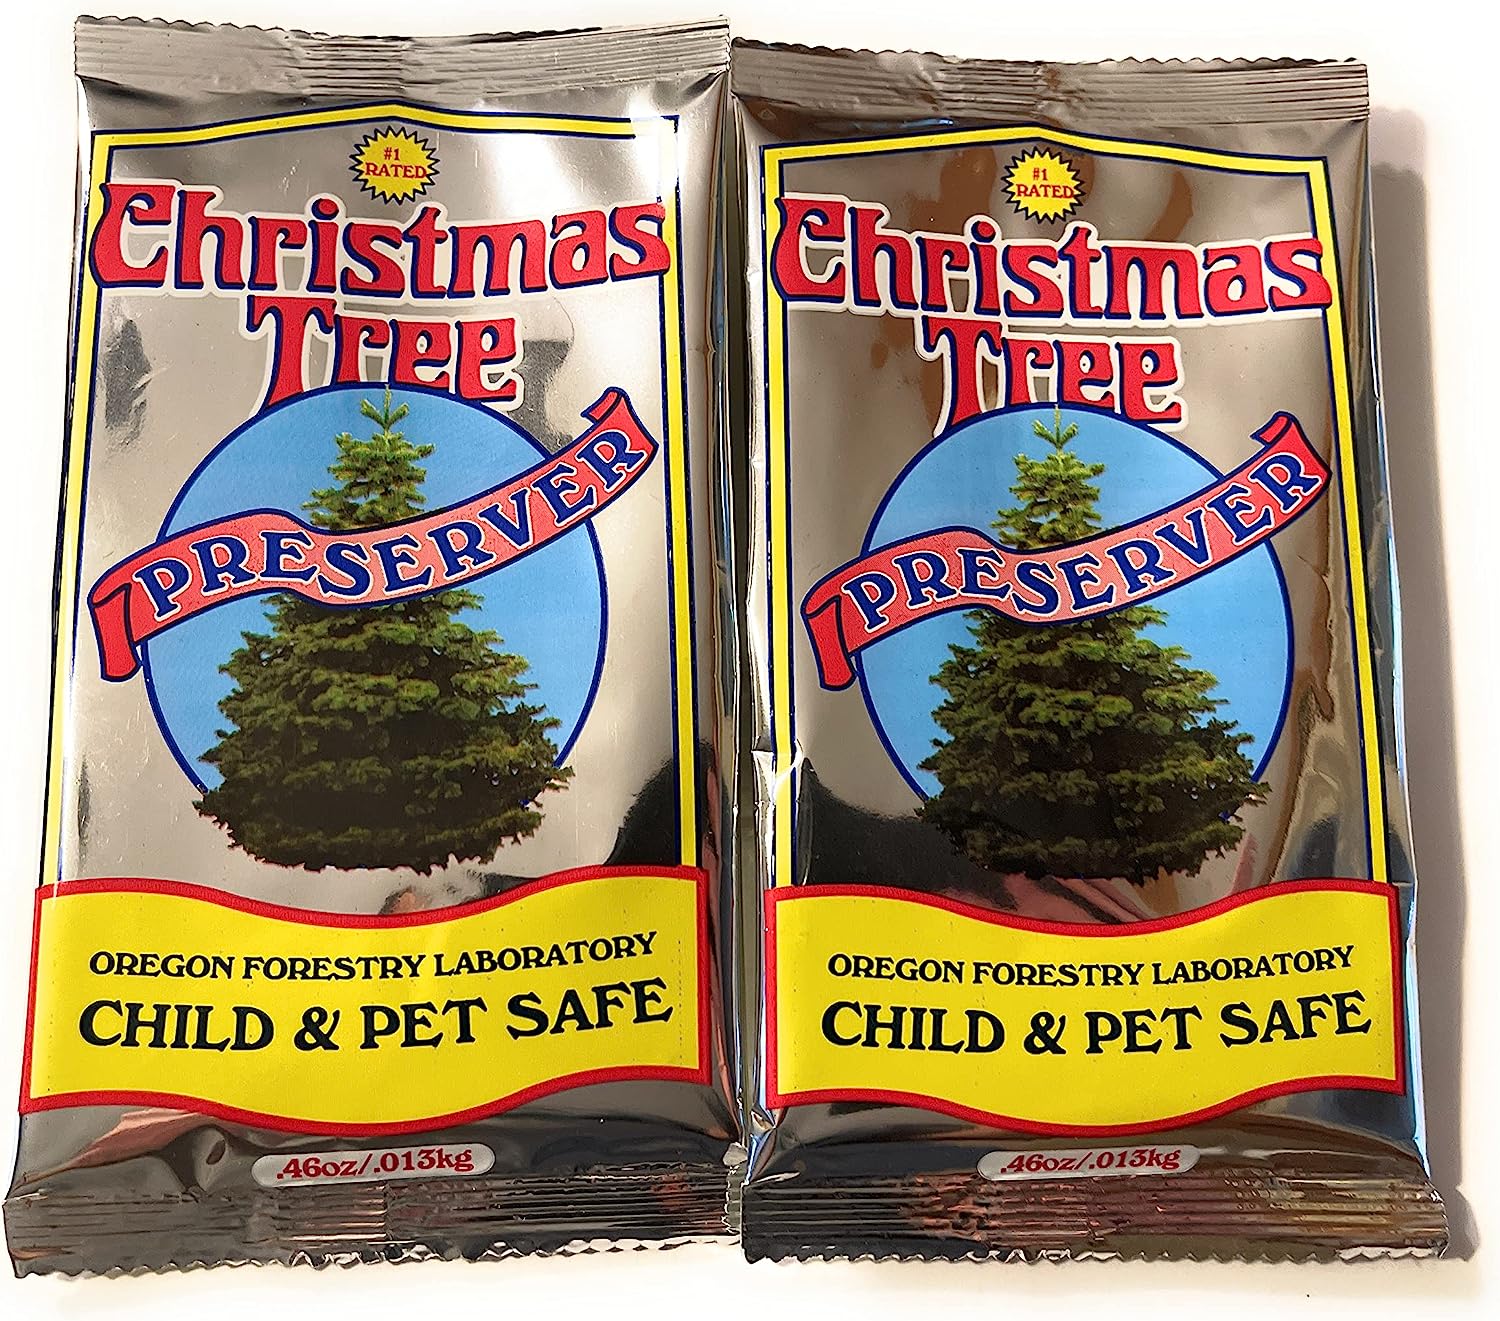 2 Pack Christmas Tree Preserver by Oregon Forestry [...]